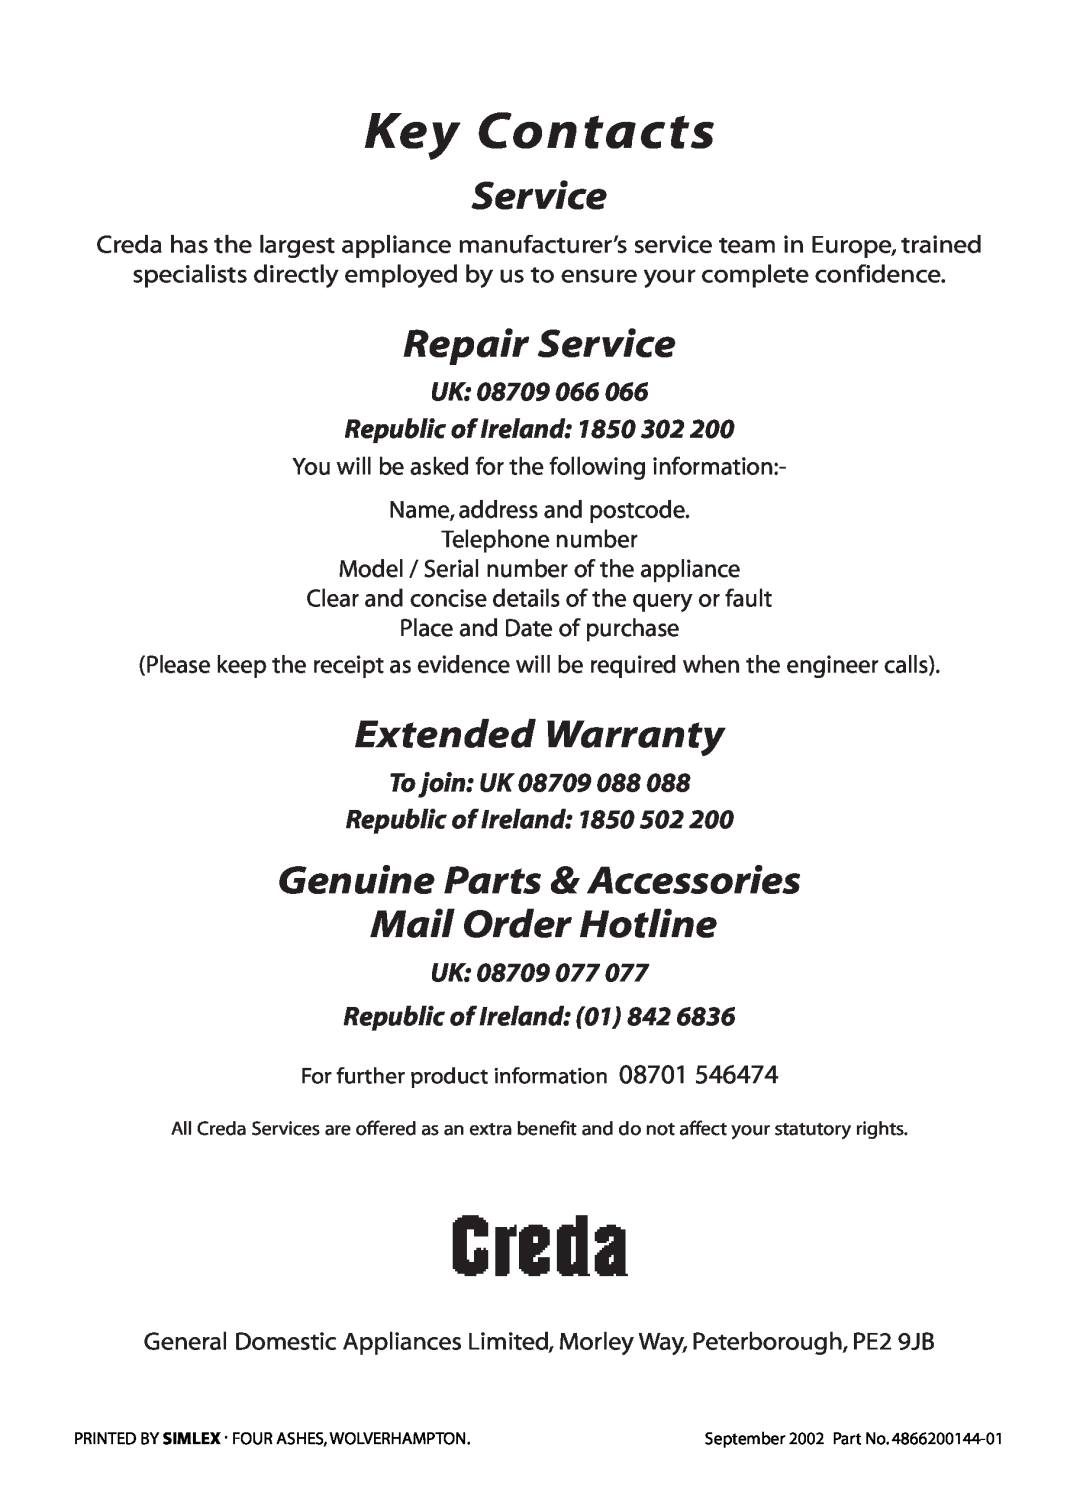 Creda C161E manual Key Contacts, Repair Service, Extended Warranty, Genuine Parts & Accessories Mail Order Hotline 